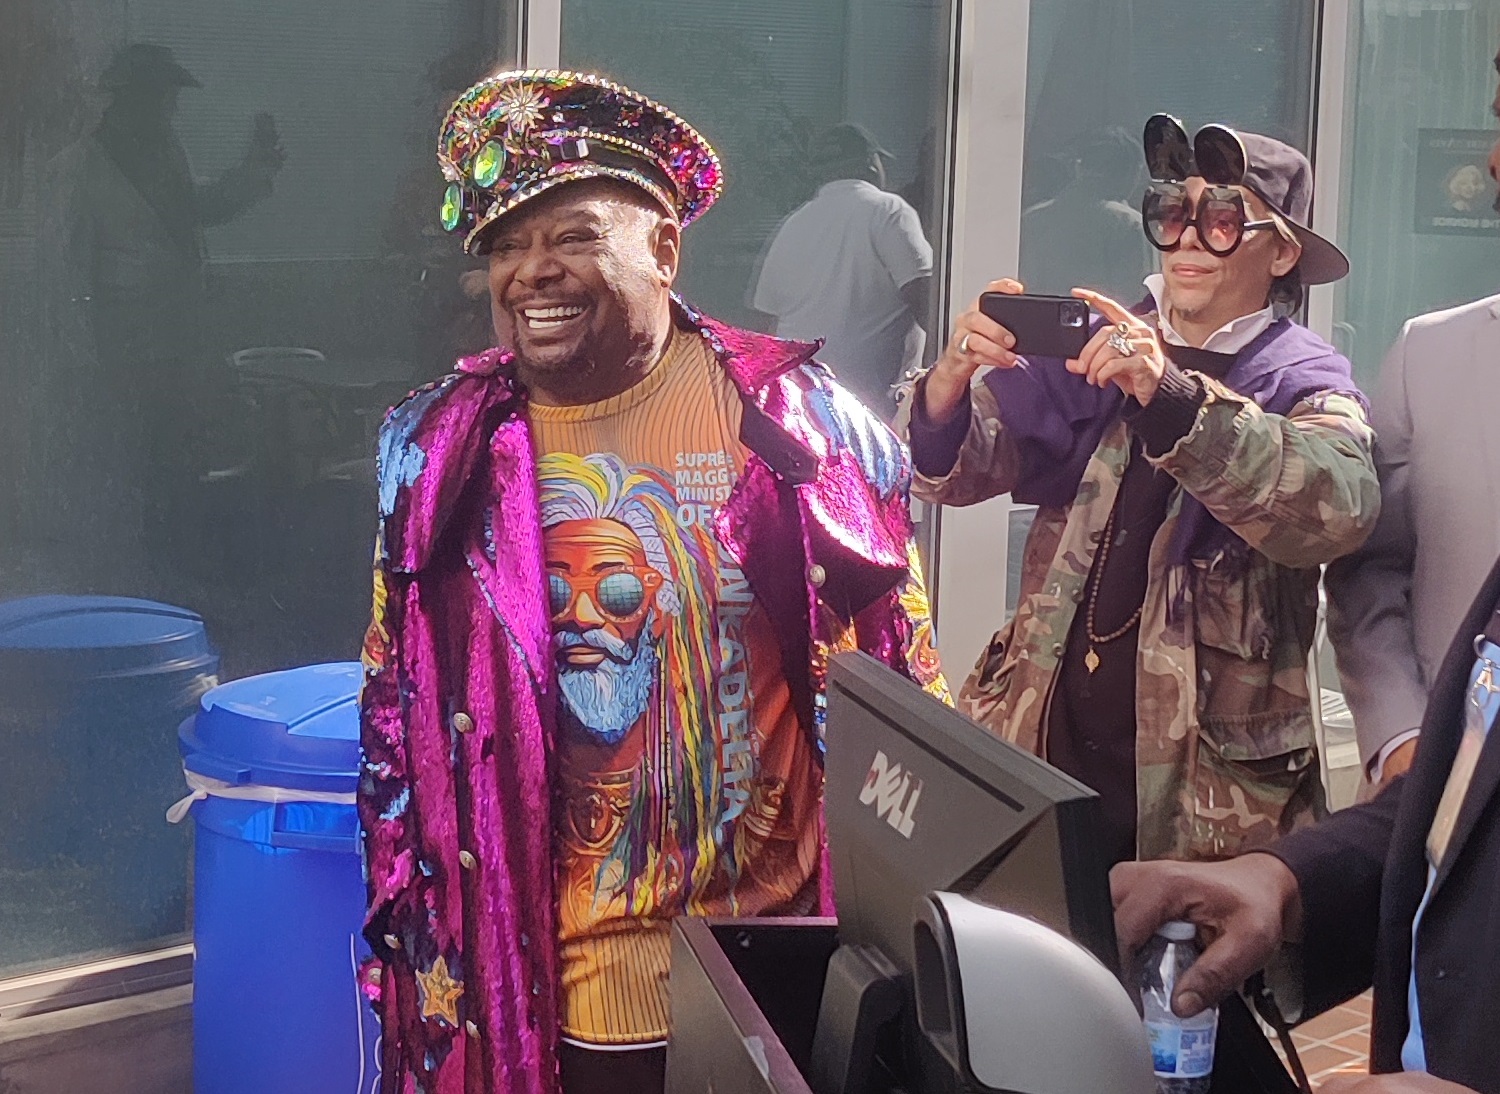 George Clinton reflects on career as he brings funk to Hollywood Walk
of Fame: ‘I’m proud as hell’